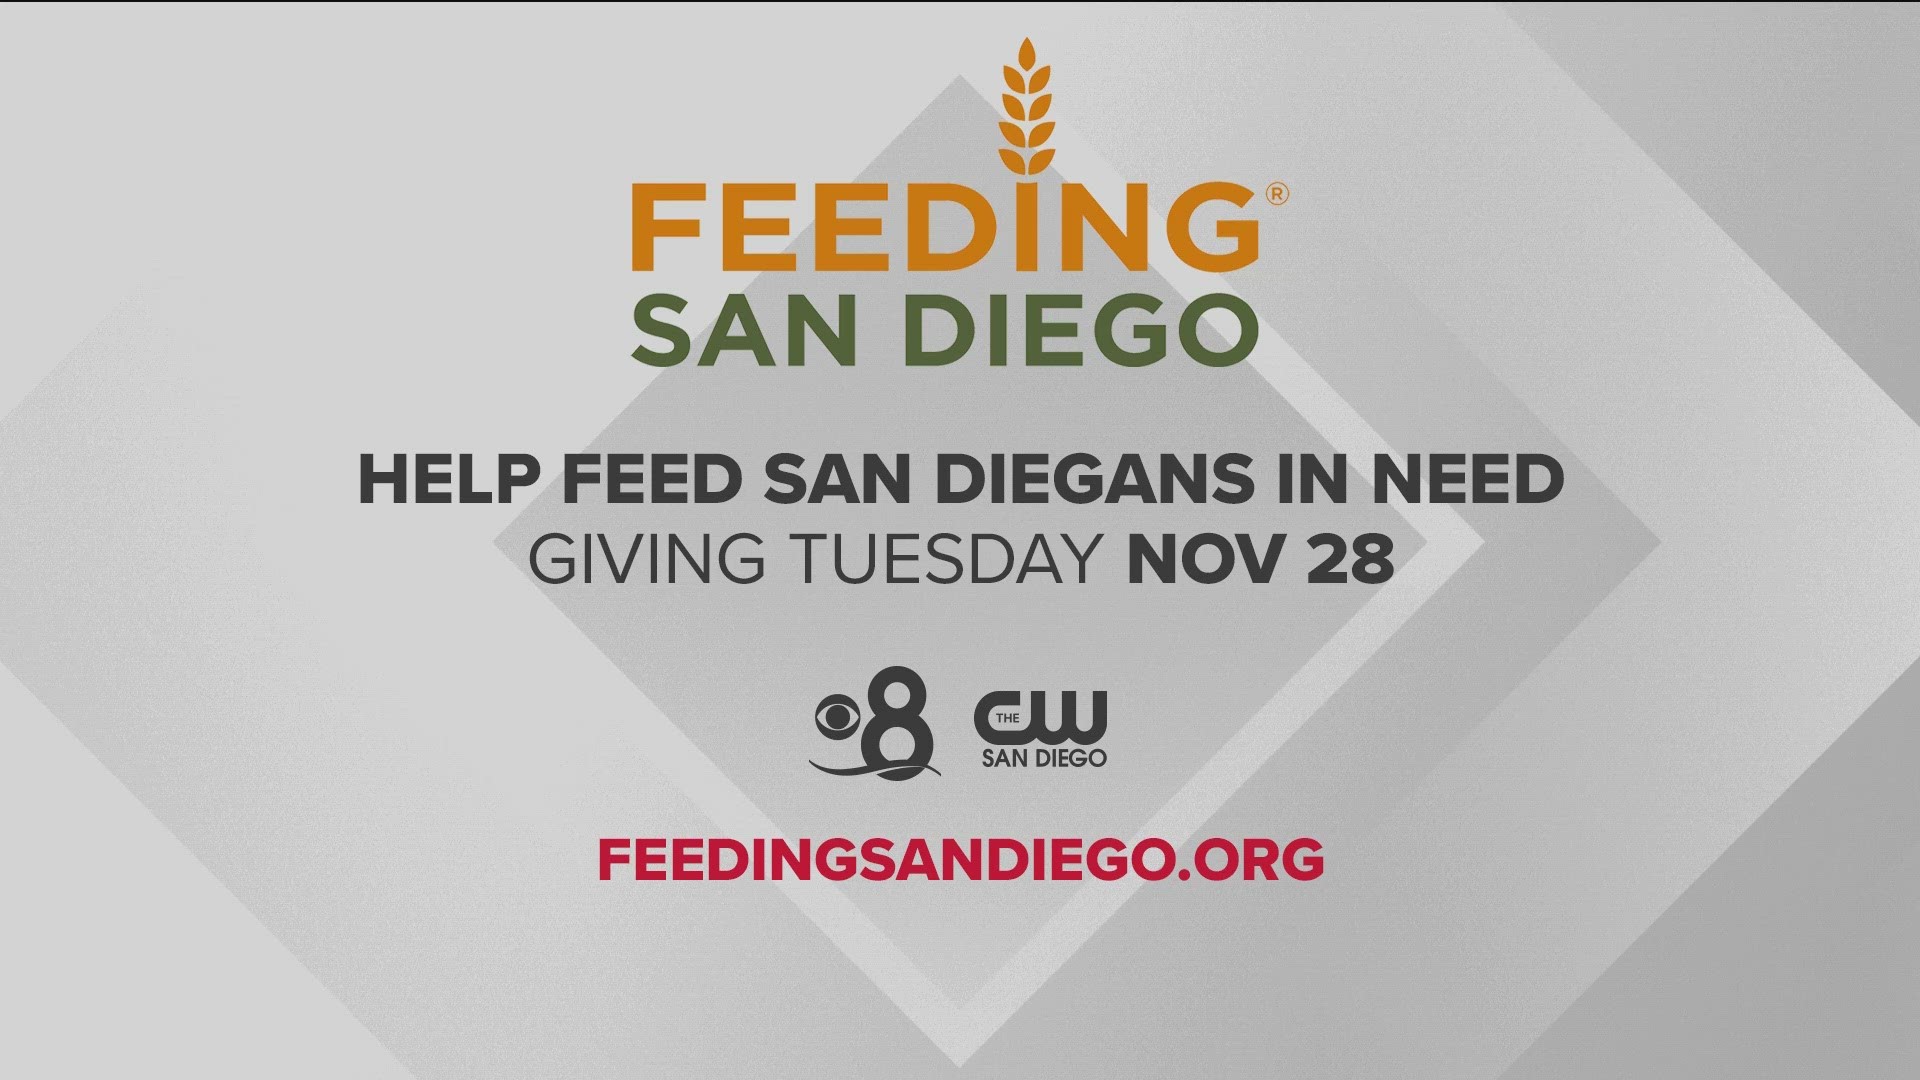 Giving Tuesday is November 28 and Feeding San Diego needs your help.